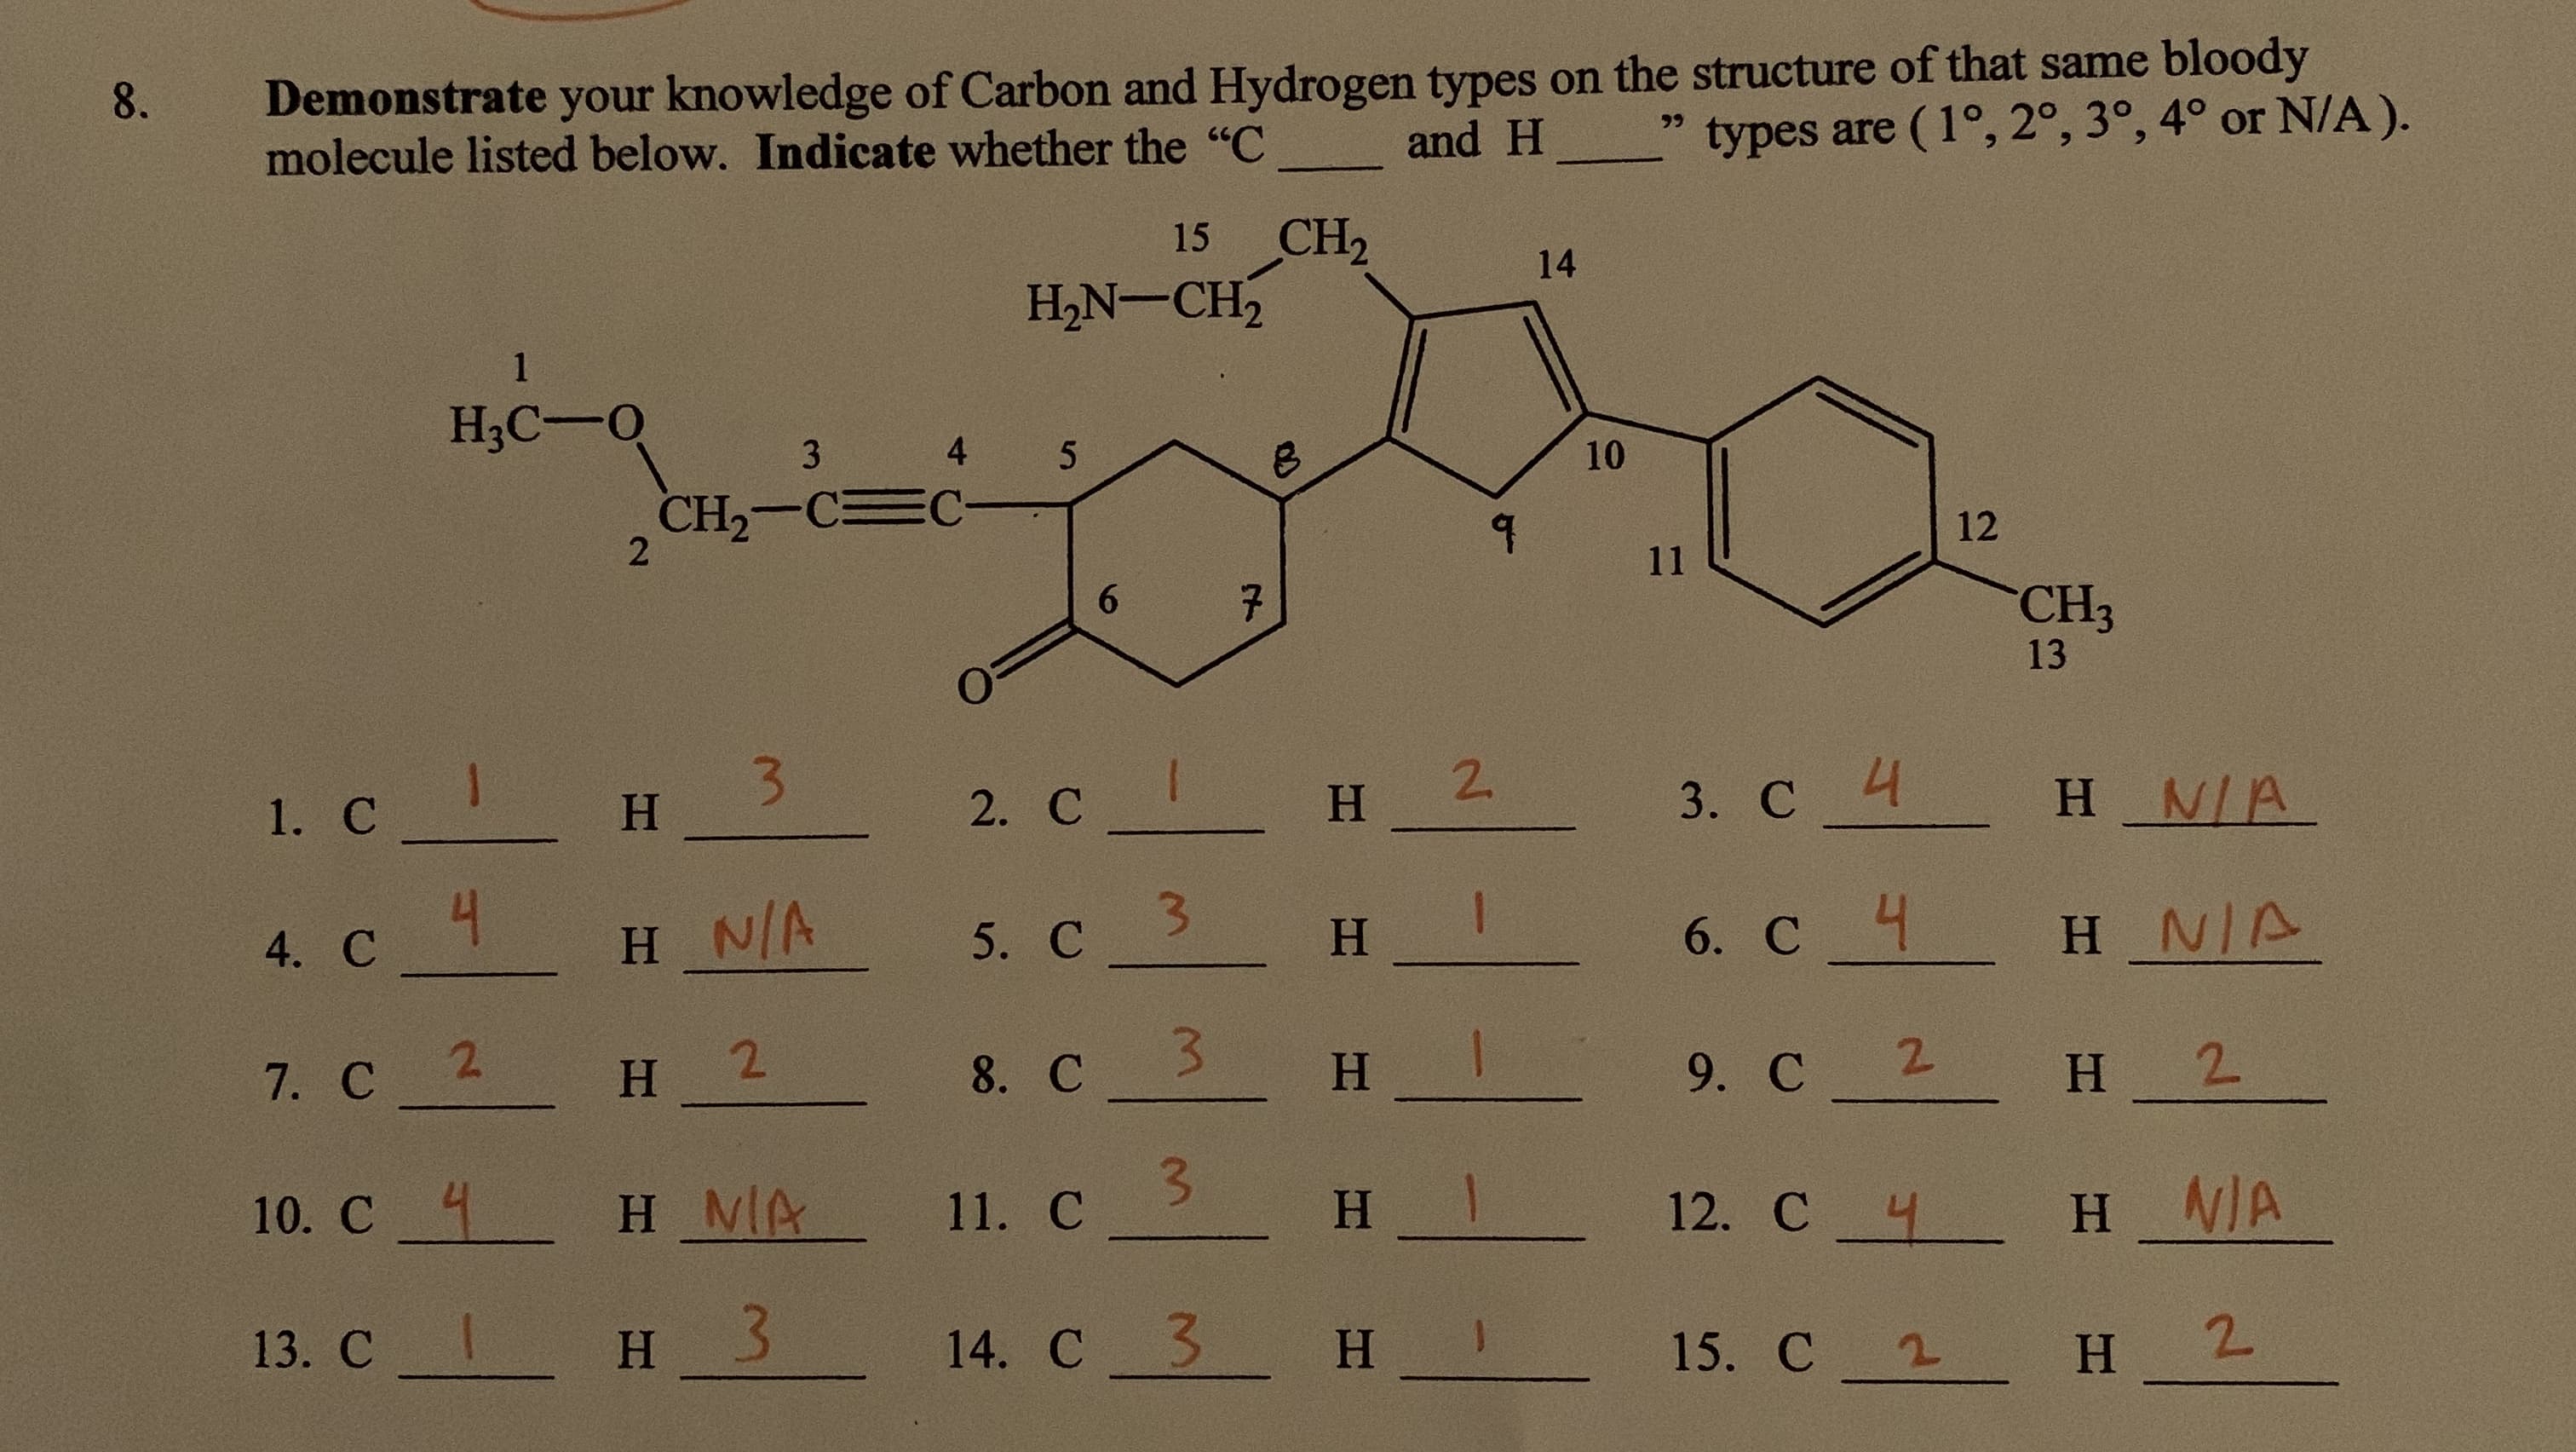 8
Demonstrate your knowledge of Carbon and Hydrogen types on the structure of that same bloody
molecule listed below. Indicate whether the "C
types are (1°, 2°, 3°, 4° or N/A).
99
and H
CH2
H2N-CH2
15
14
1
НАС —0
4
3
5
10
CH2-C
2
12
11
6
7
CH3
13
3
H
1. с _
3. C H N/A
2. C
H 2
H_N/A
4. С
С 4
5. С
H NIA
H
6. C
3
2
7. с 2
H
8. C
9. С 2
H
H 2
10. C H MA
11. С
H
H N/A
12. C
13. С I
H 3
14. С 3
н_
15. C
H
